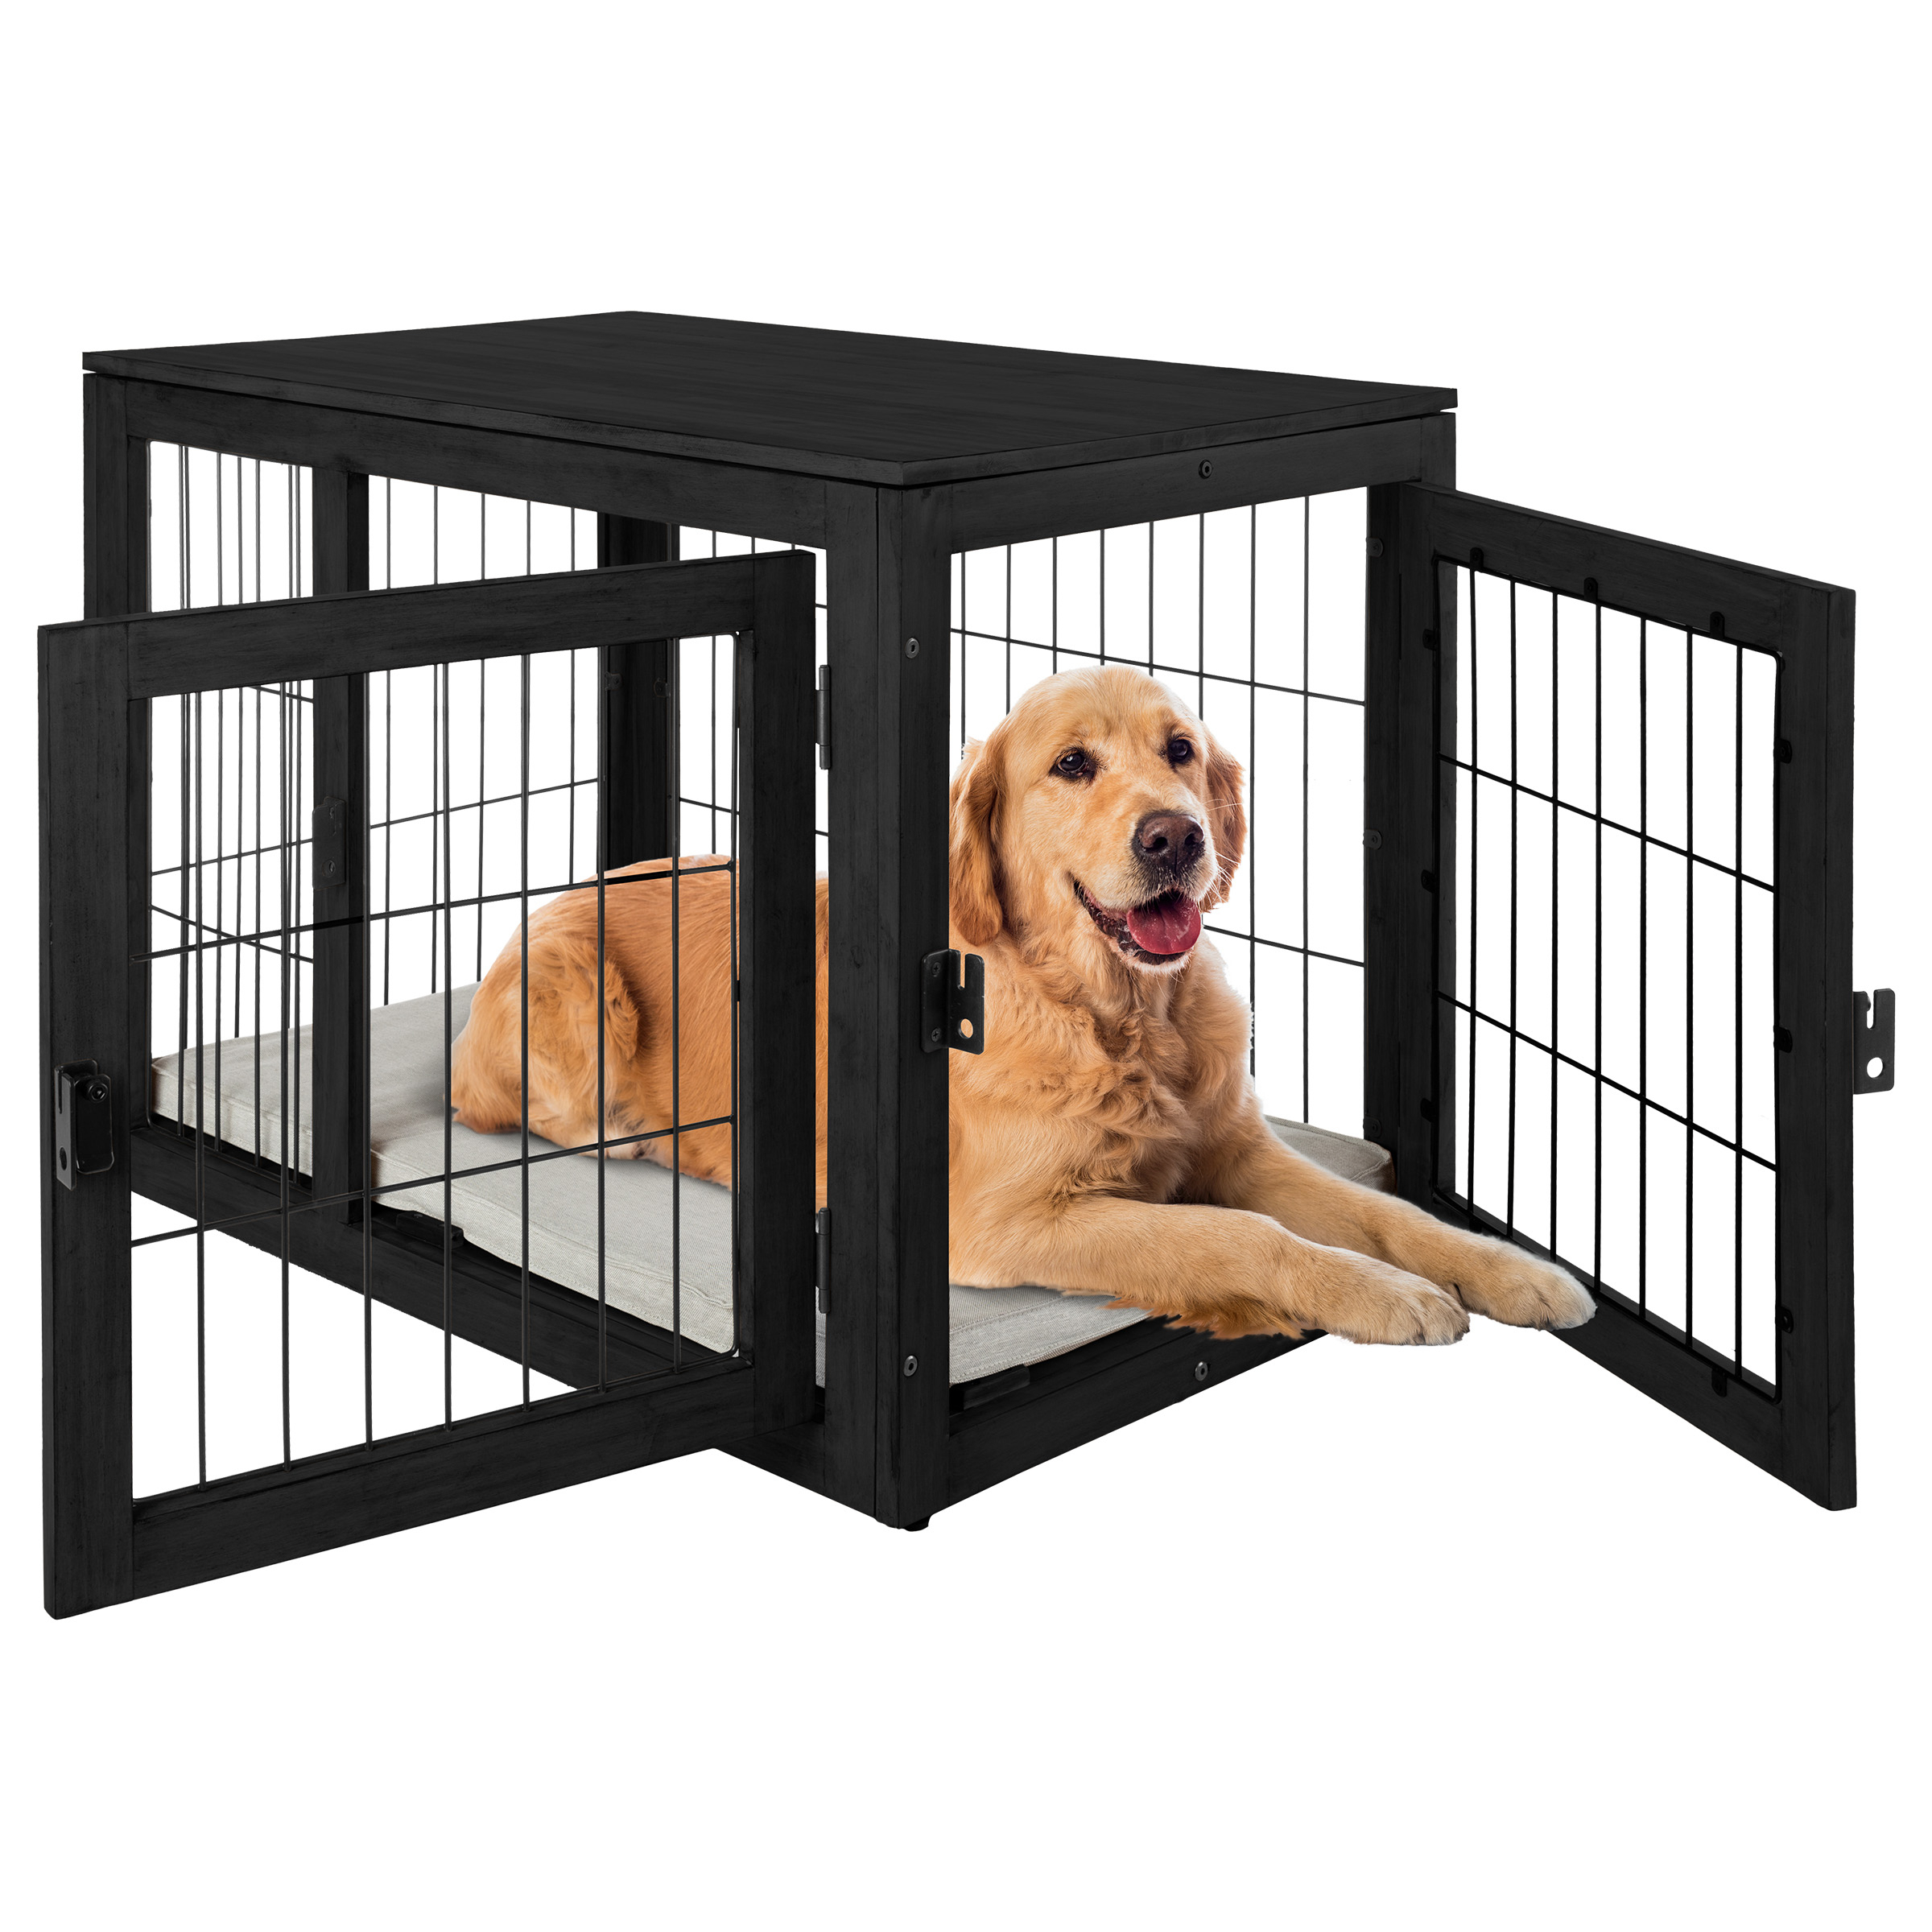 Furniture-Style Dog Crate - Acacia Wood Kennel For Large Dogs With Double Doors And Cushion - Dog Kennel Furniture By PETMAKER (Black)